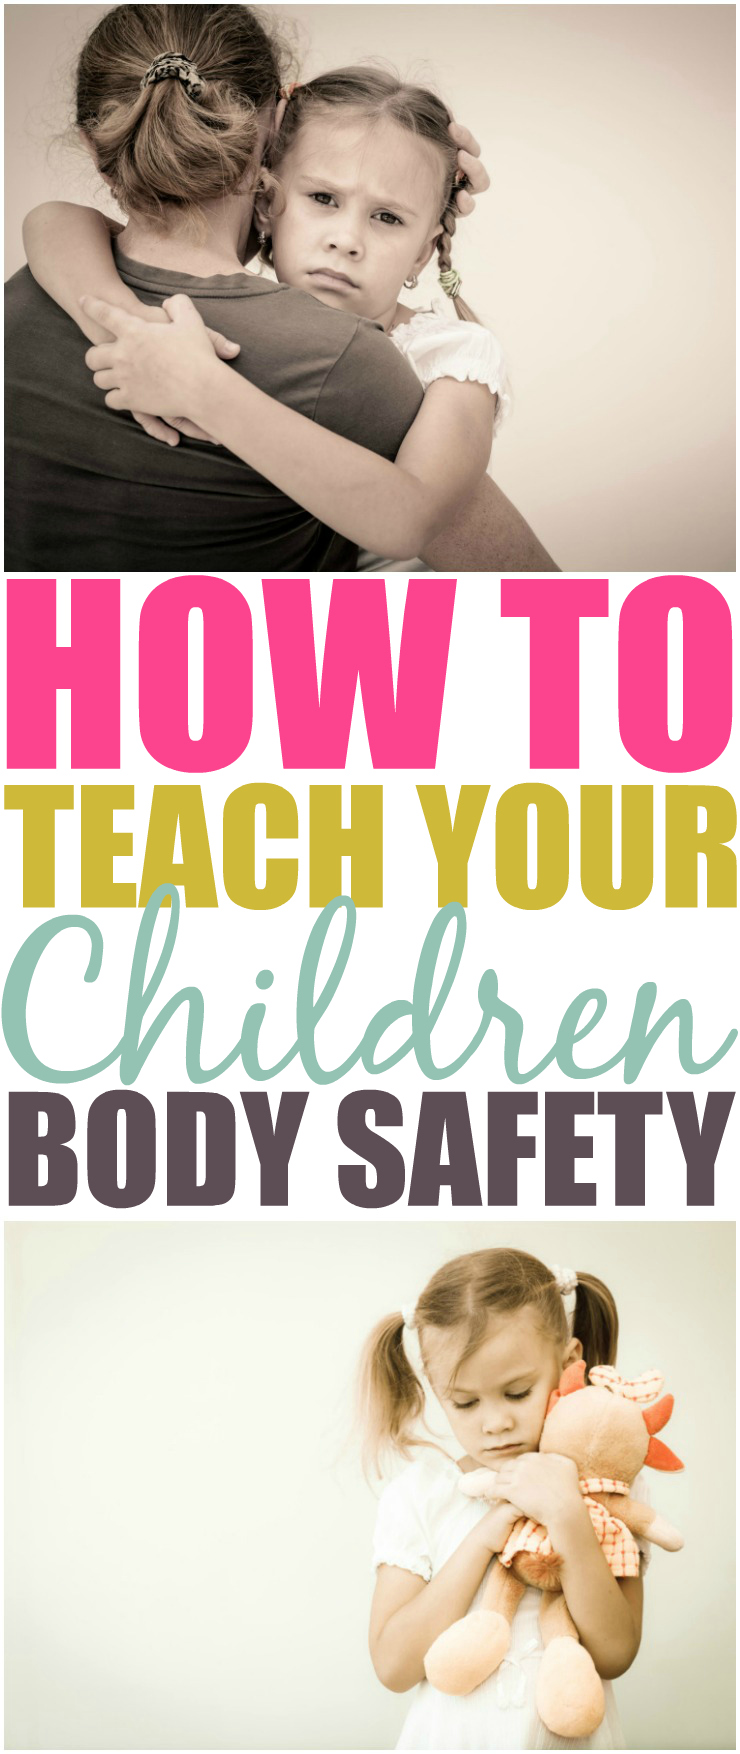 How To Teach Your Children Body Safety